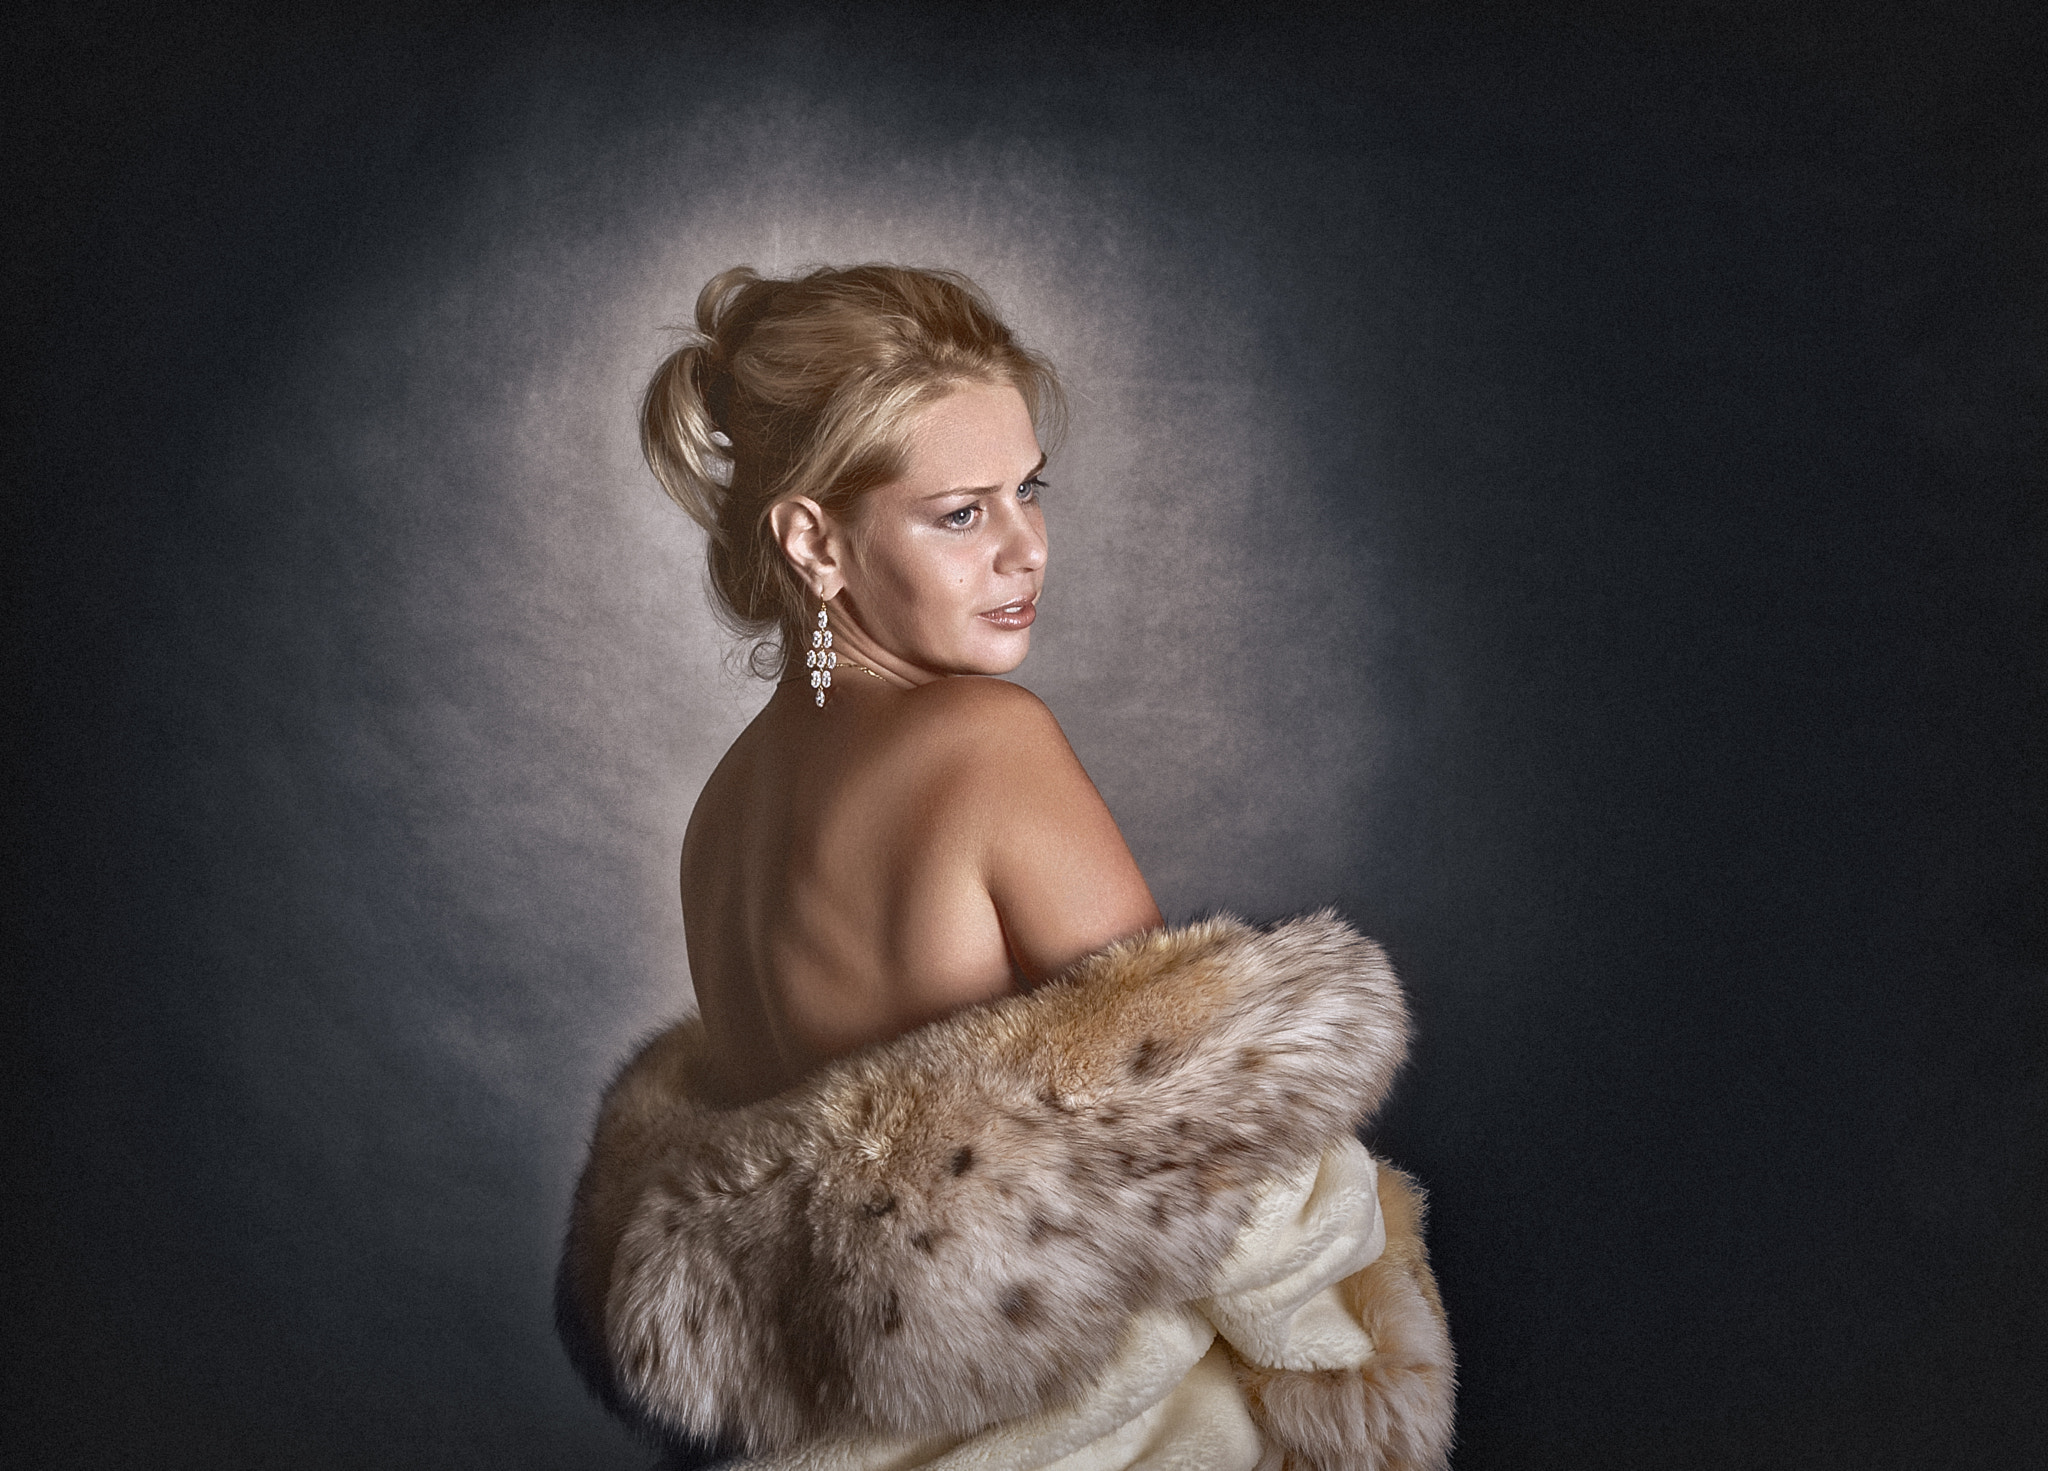 Nikon D300 sample photo. Portrait of a beautiful young woman in a fur coat photography